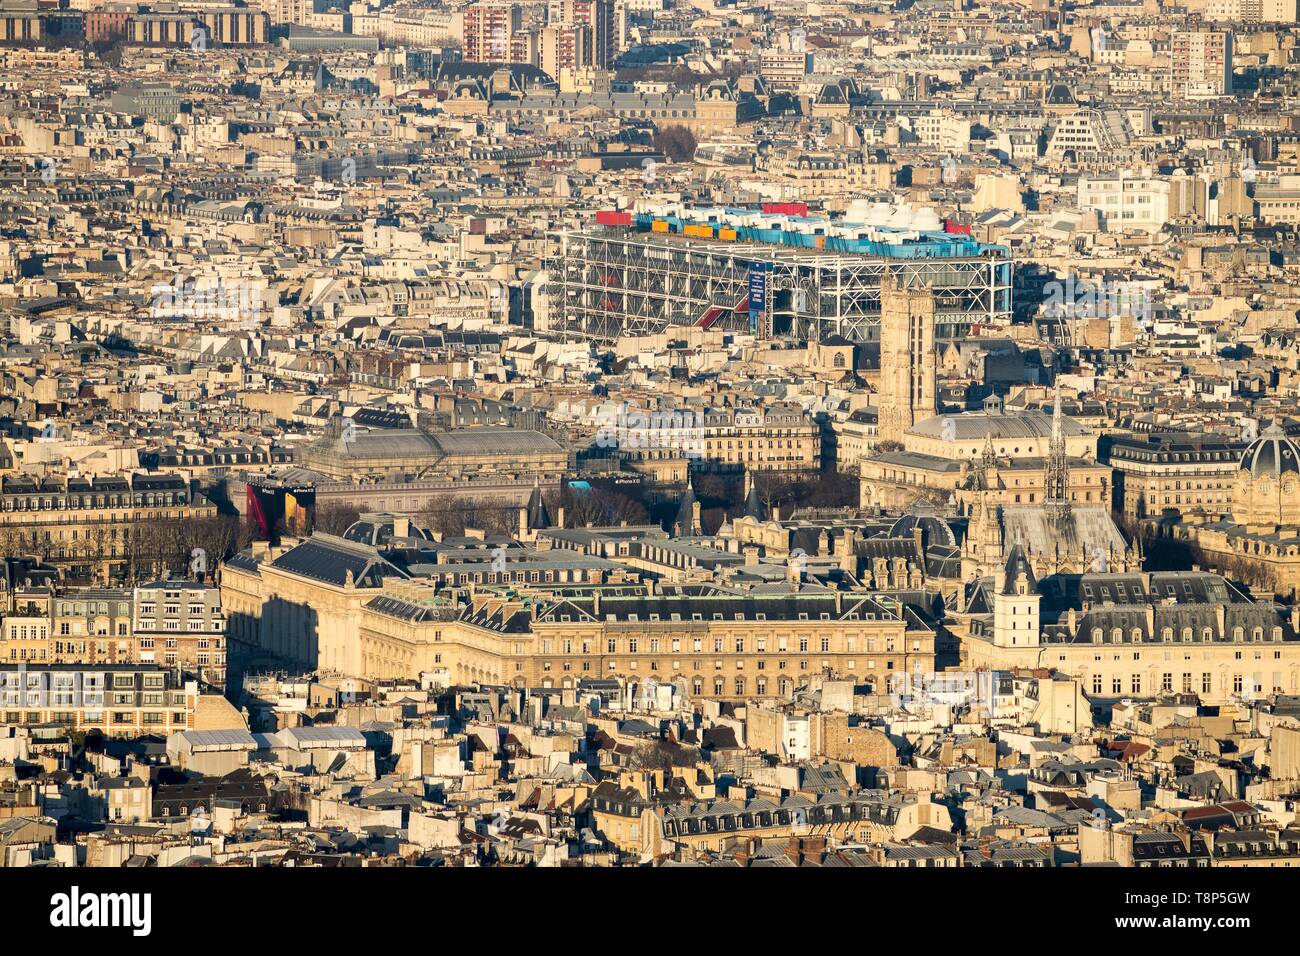 France, Paris, Les Halles district, the Pompidou Center or Beaubourg, architects Renzo Piano, Richard Rogers and Gianfranco Franchini, in front of the Saint-Jacques Tower Stock Photo